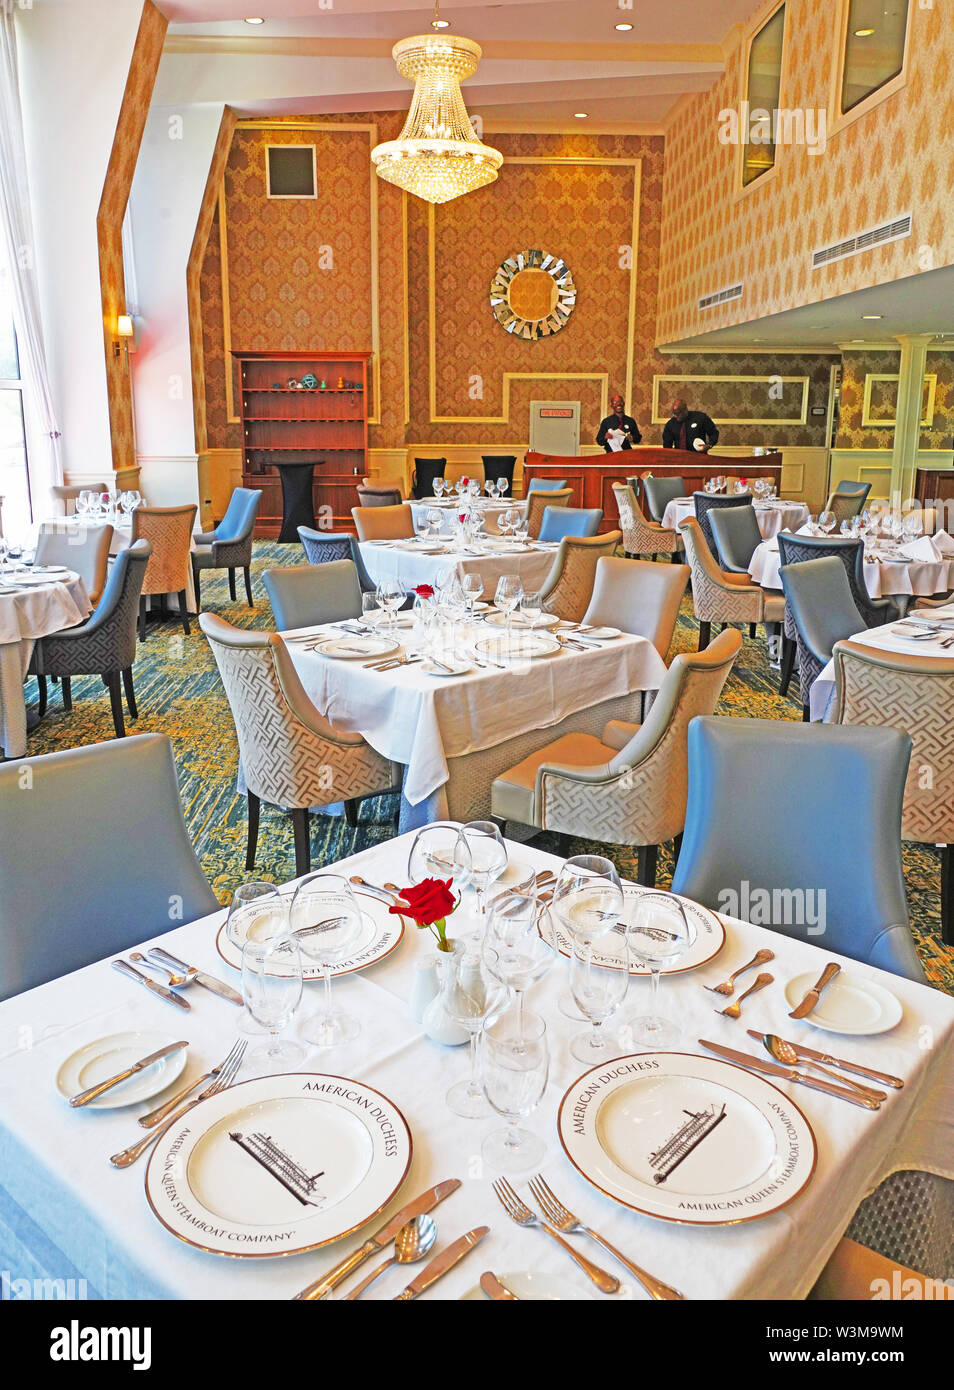 The Grand Dining Room of the American Duchess stern wheel riverboat of the American Queen Steamboat Company on Ohio River. Stock Photo